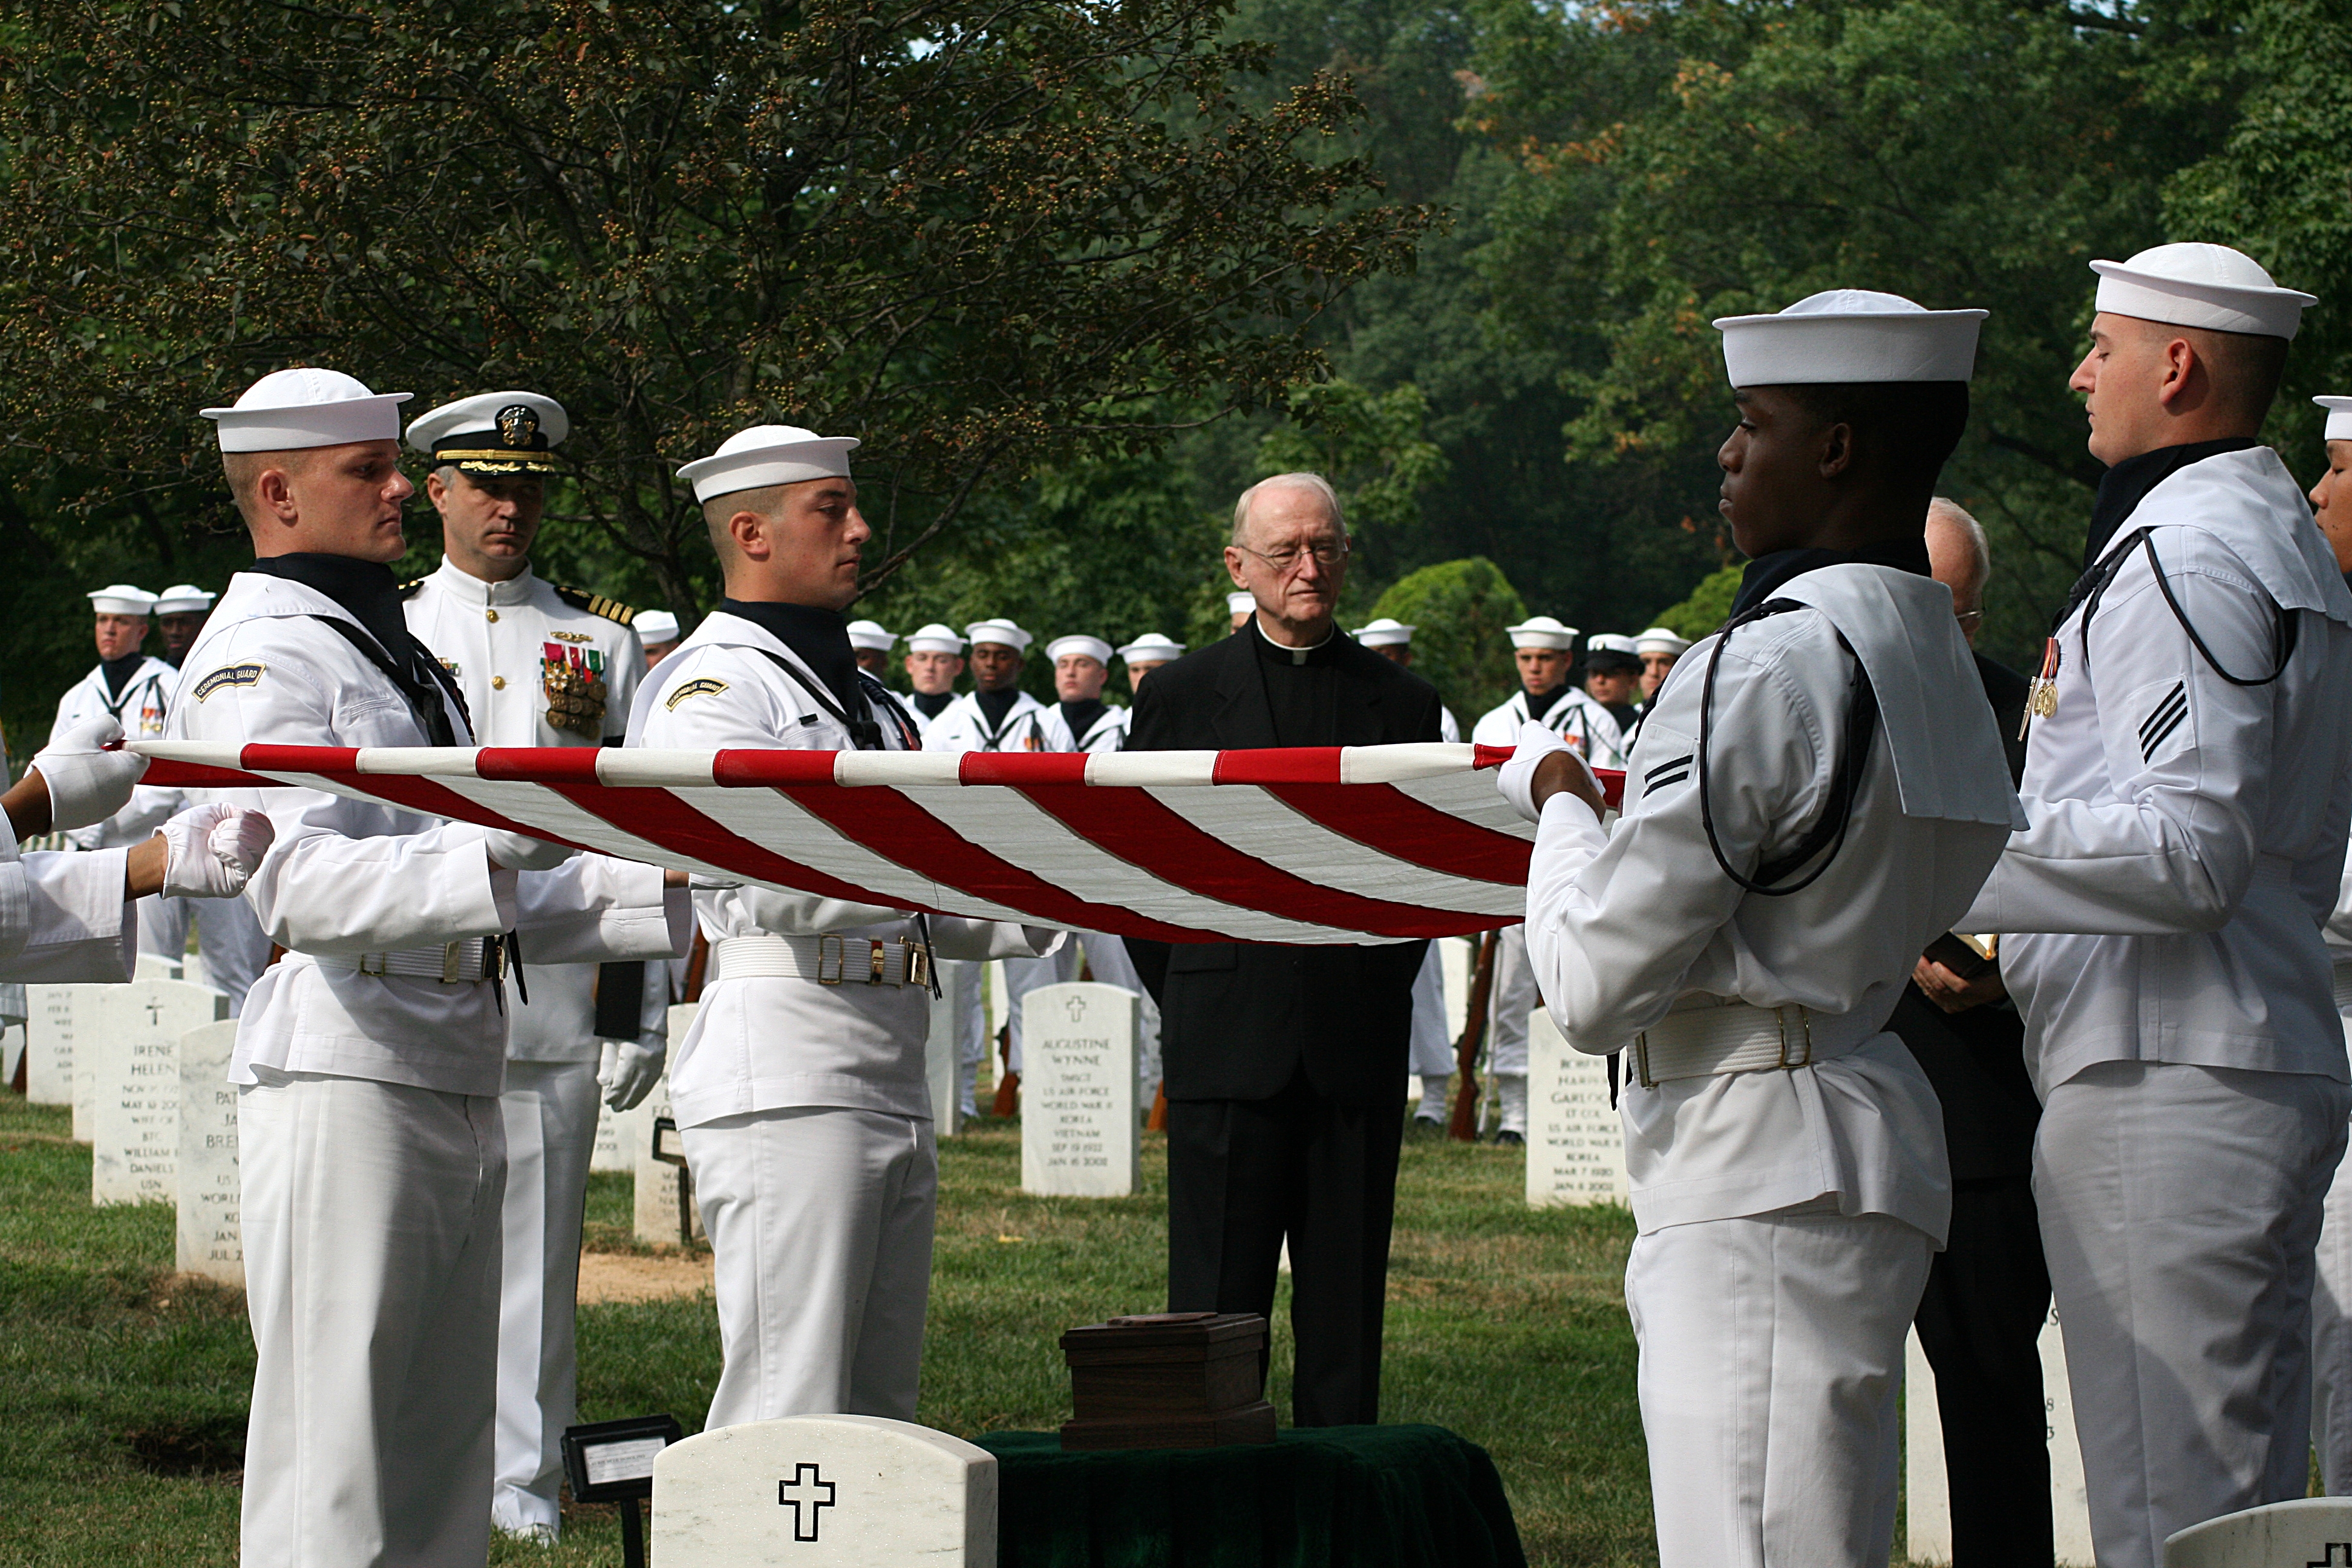 US_Navy_090817-N-0000X-002_Members_of_the_U.S._Navy_Ceremonial_Guard_render_honors_during_a_military_funeral_for_retired_Navy_Capt._Laurie_Mosolino.jpg